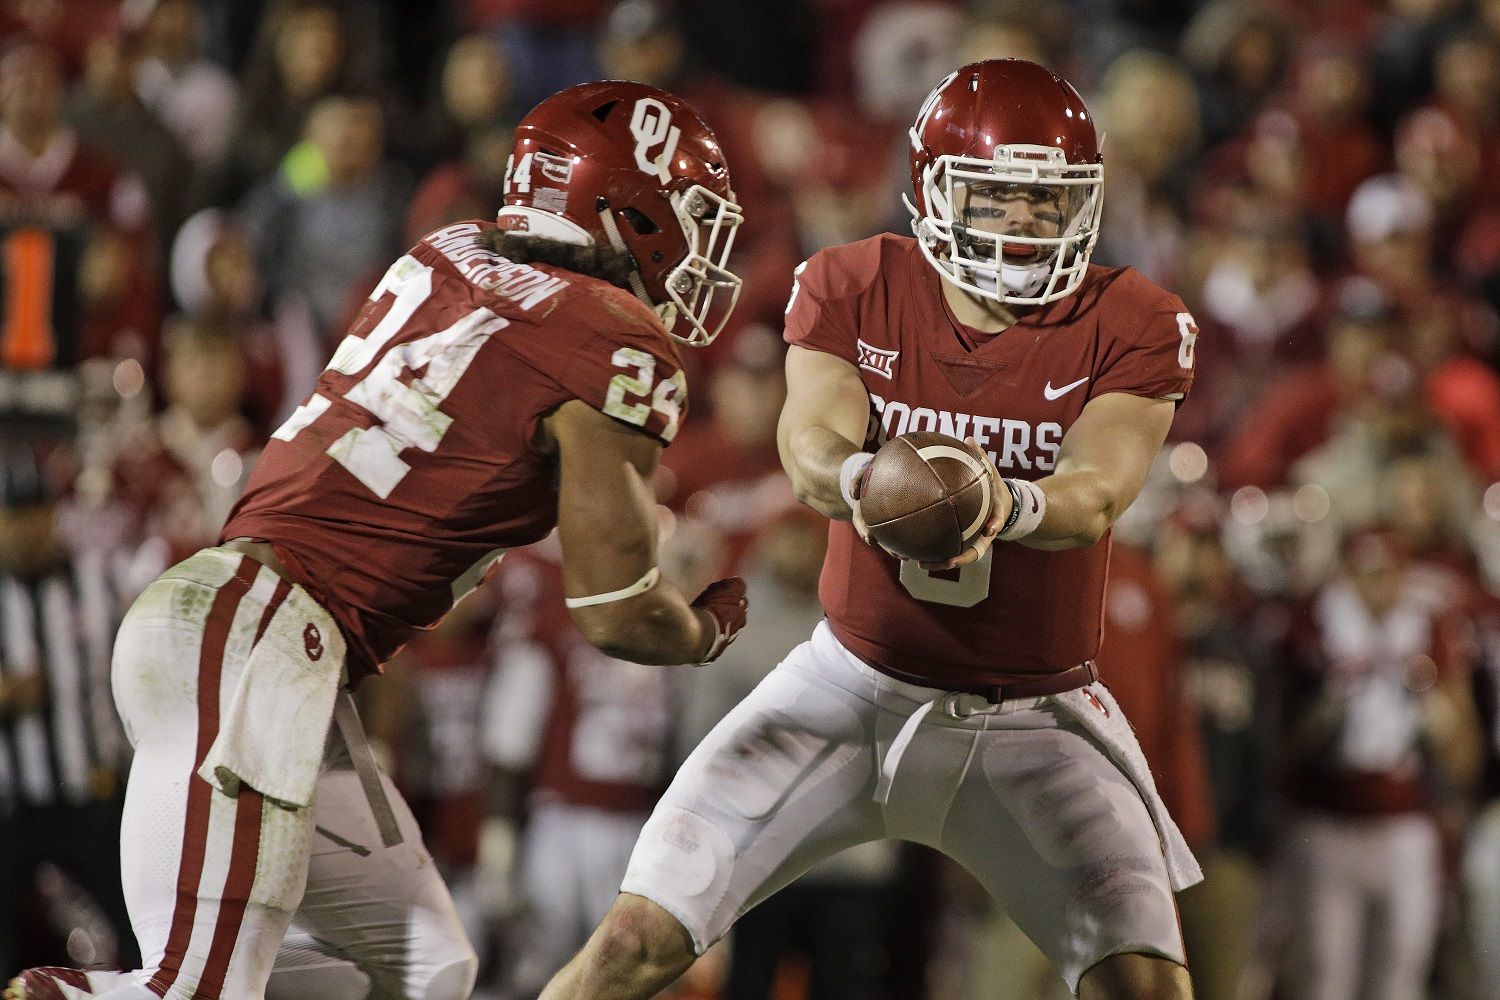 NORMAN, OK - OCTOBER 28: Quarterback Baker Mayfield #6 hands off to running back Rodney Anderson #24 of the Oklahoma Sooners at Gaylord Family Oklahoma Memorial Stadium on October 28, 2017 in Norman, Oklahoma. Oklahoma defeated Texas Tech 49-27. (Photo by Brett Deering/Getty Images)